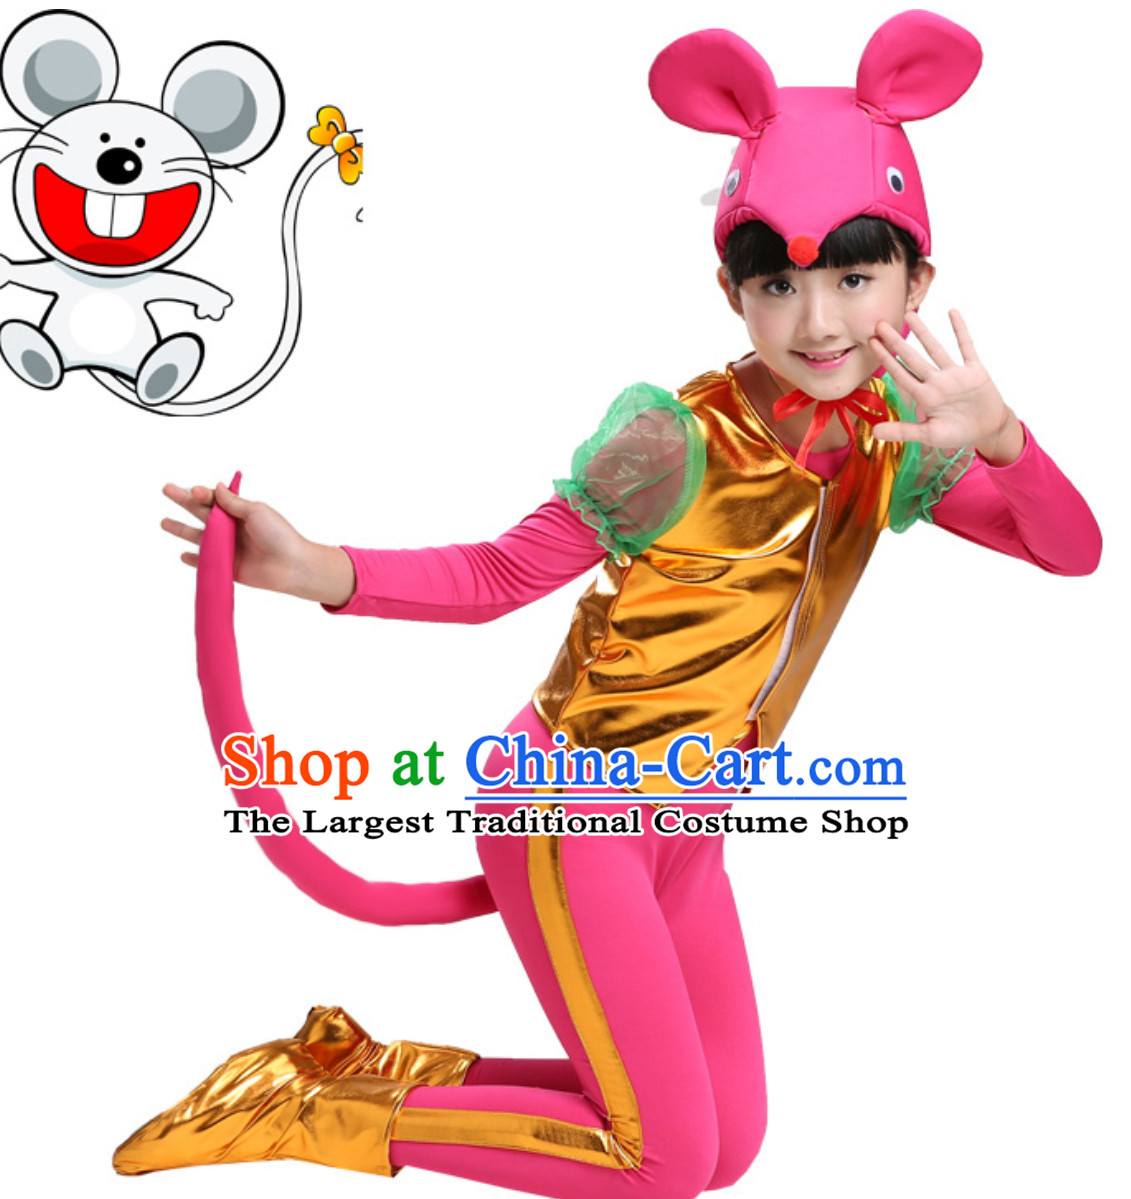 Chinese Lunar New Year Celebration Rat Year Mouse Dance Costume Complete Set